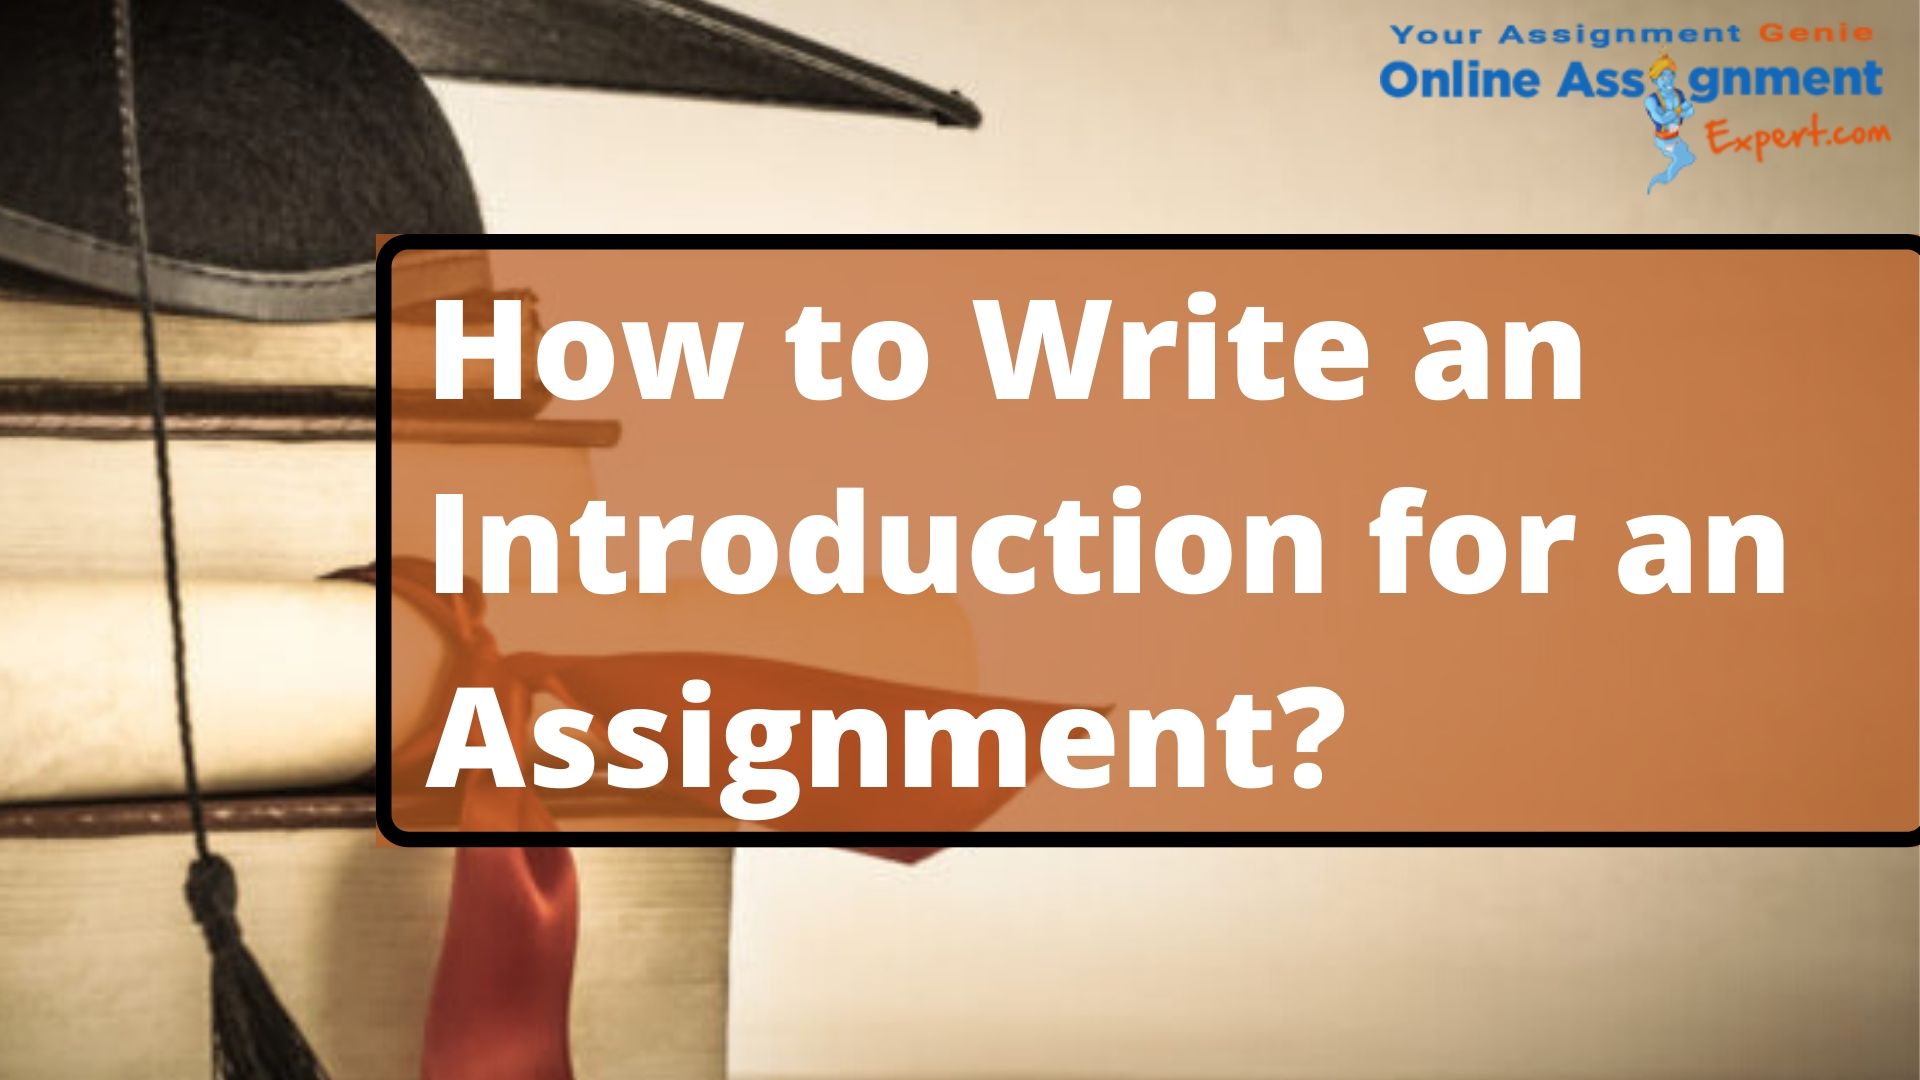 How to Write an Introduction for an Assignment?